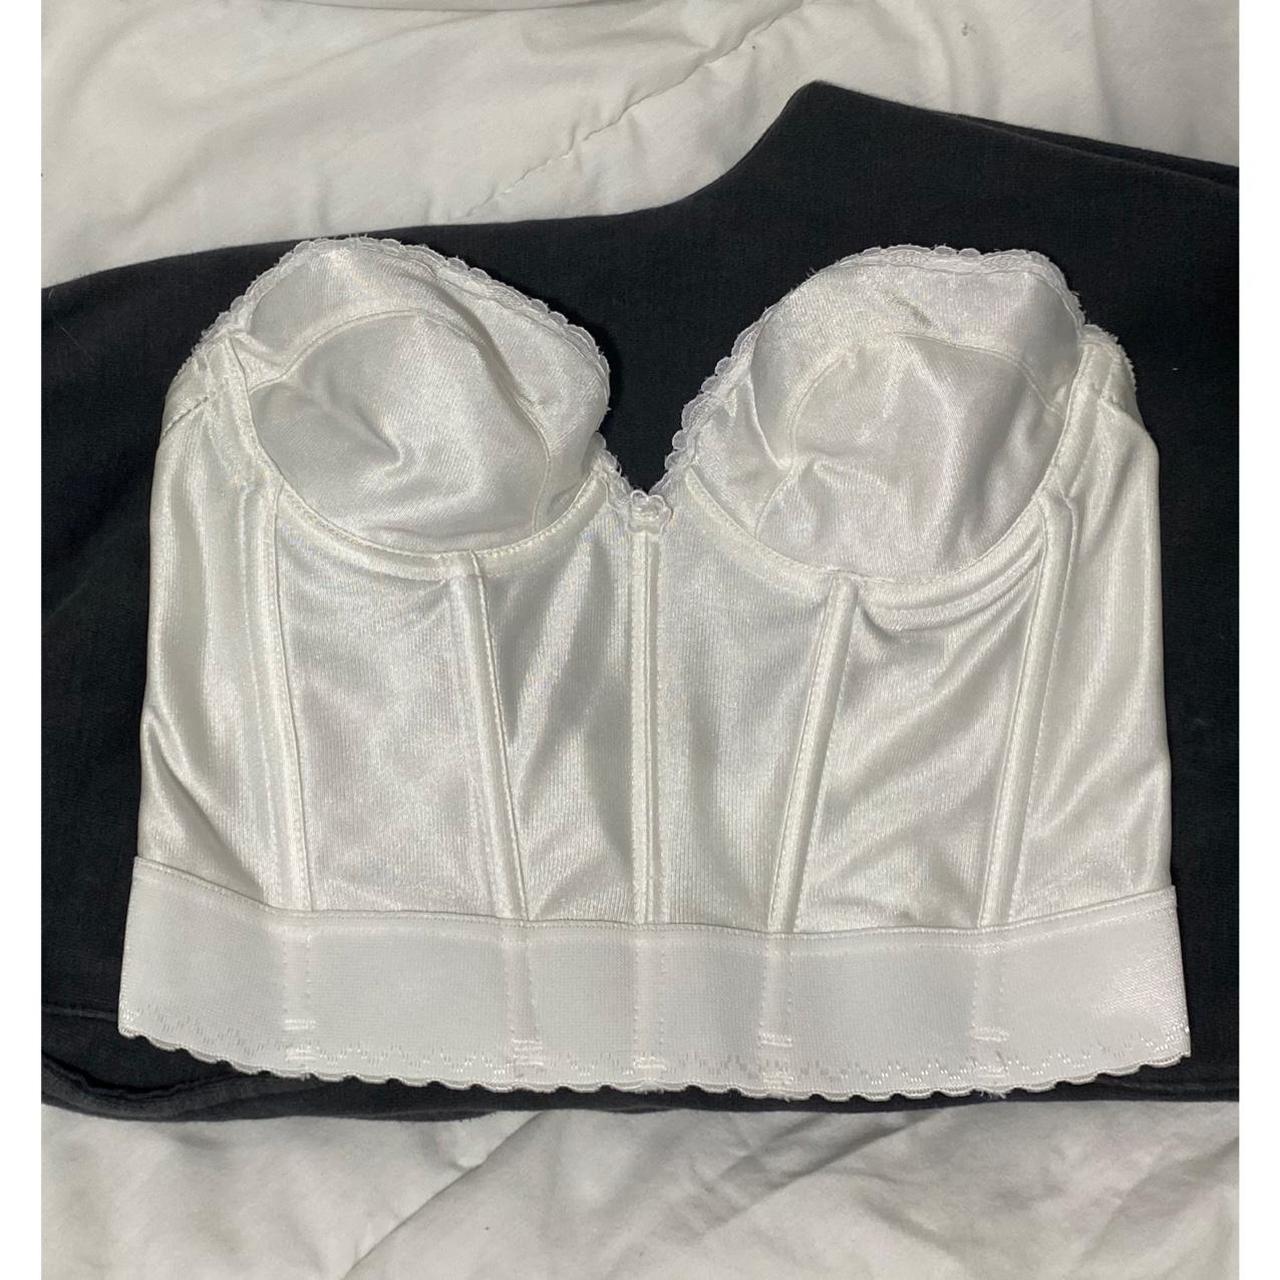 vintage corset top , bra size: 35 B (can be faintly